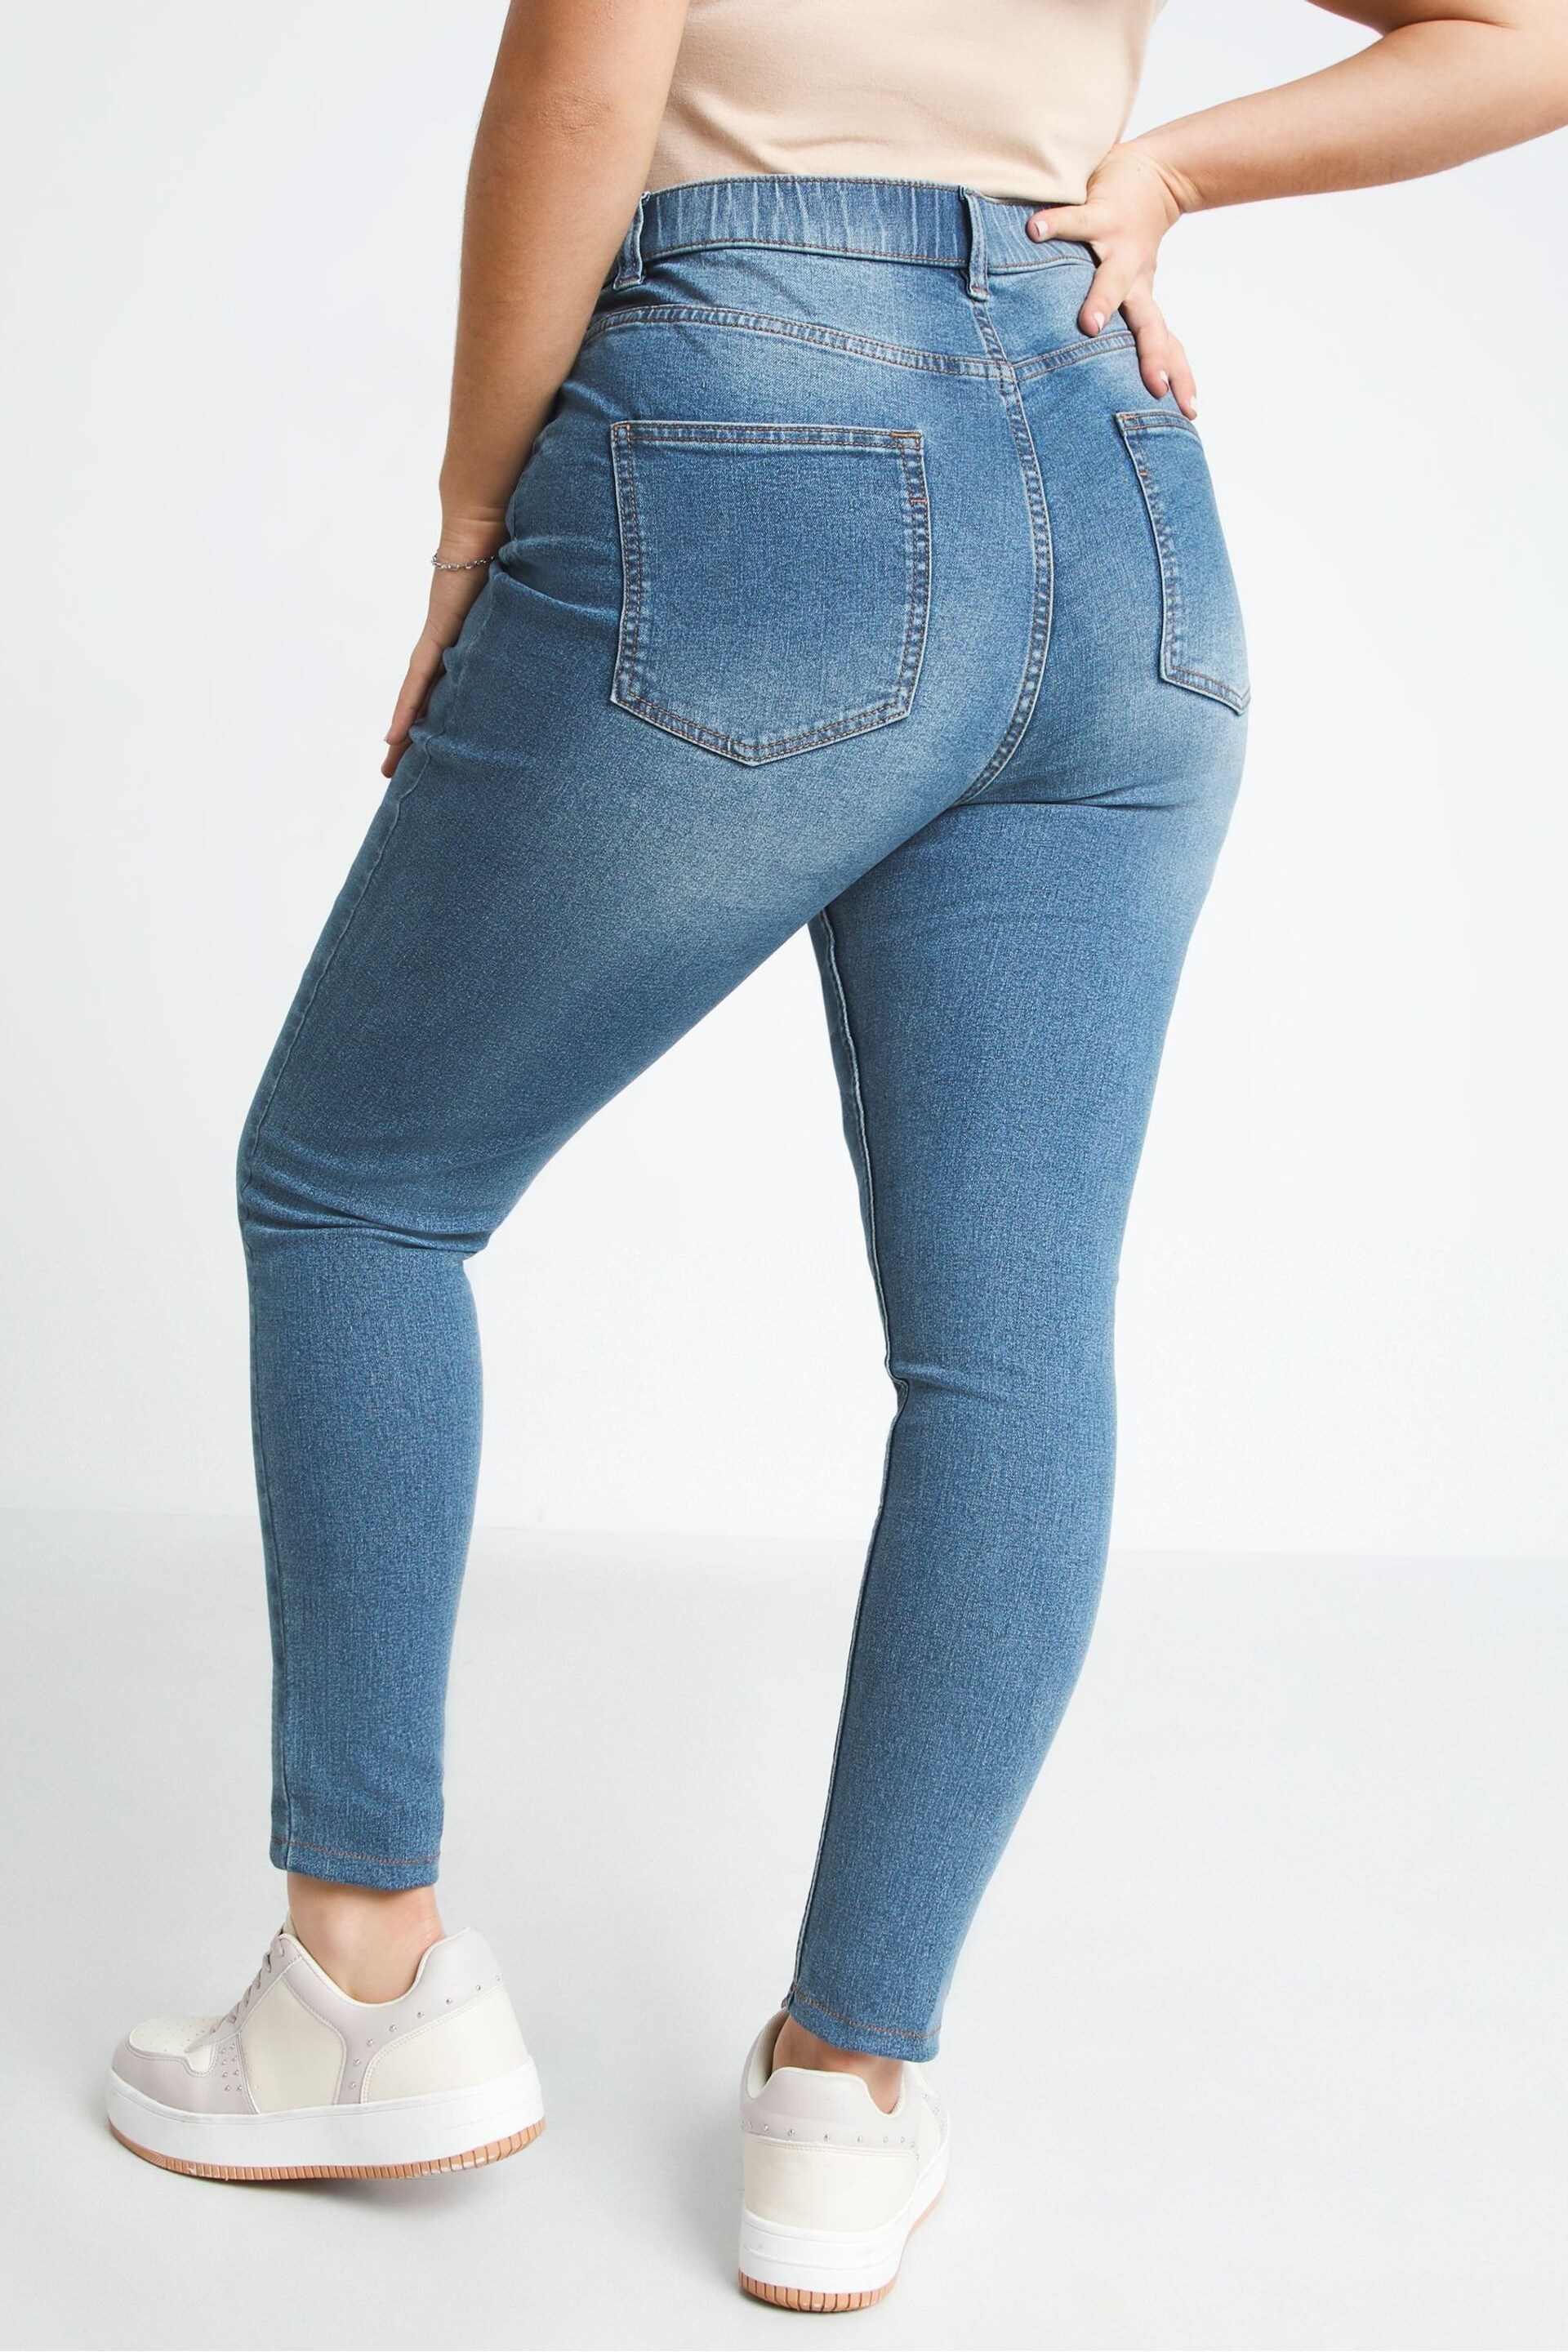 Simply Be Mid Blue 24/7 Skinny Jeans - Image 2 of 4